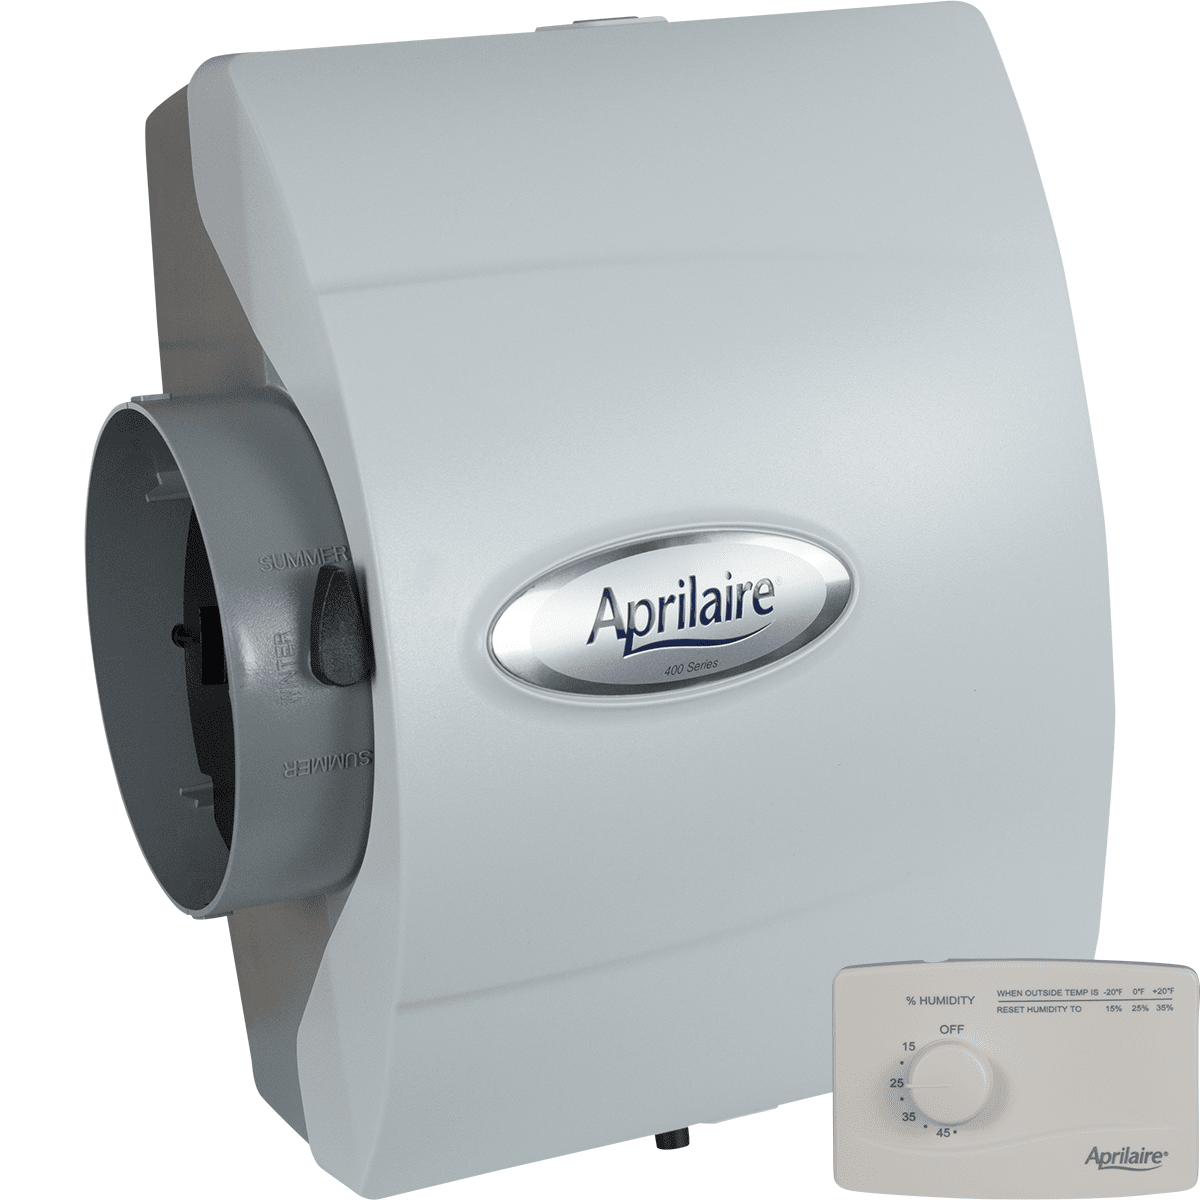 Aprilaire 400 Drainless Bypass Humidifier - Manual Control